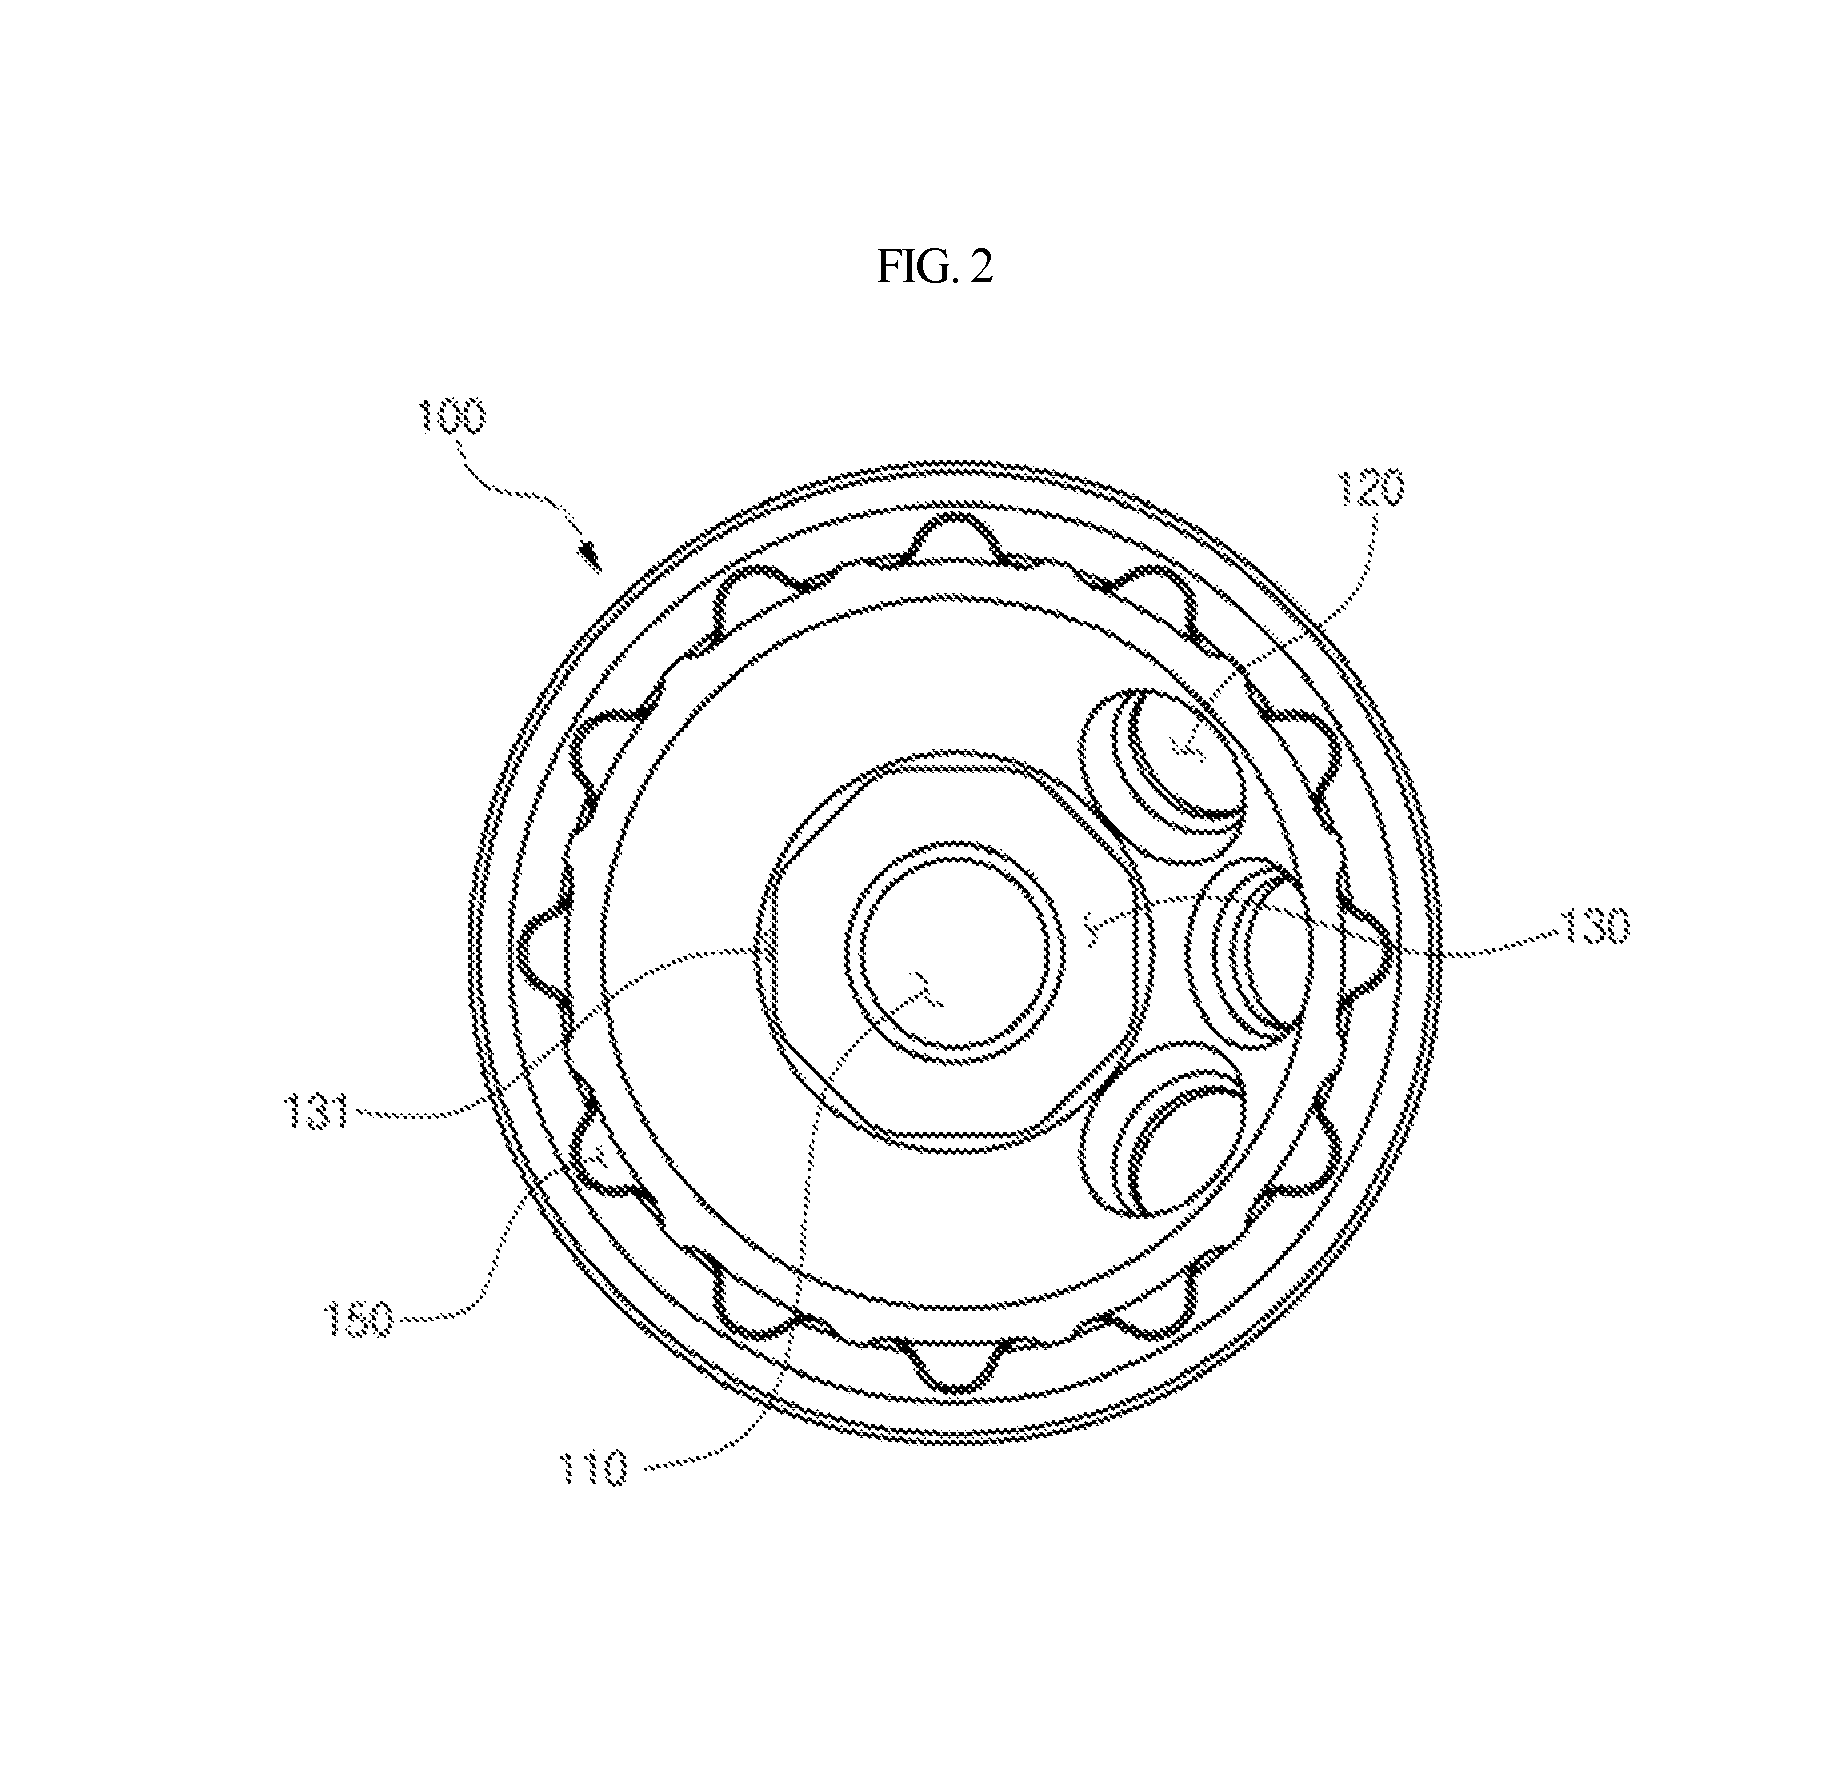 Acetabular cup for an artificial hip joint and bearing, and acetabular cup assembly